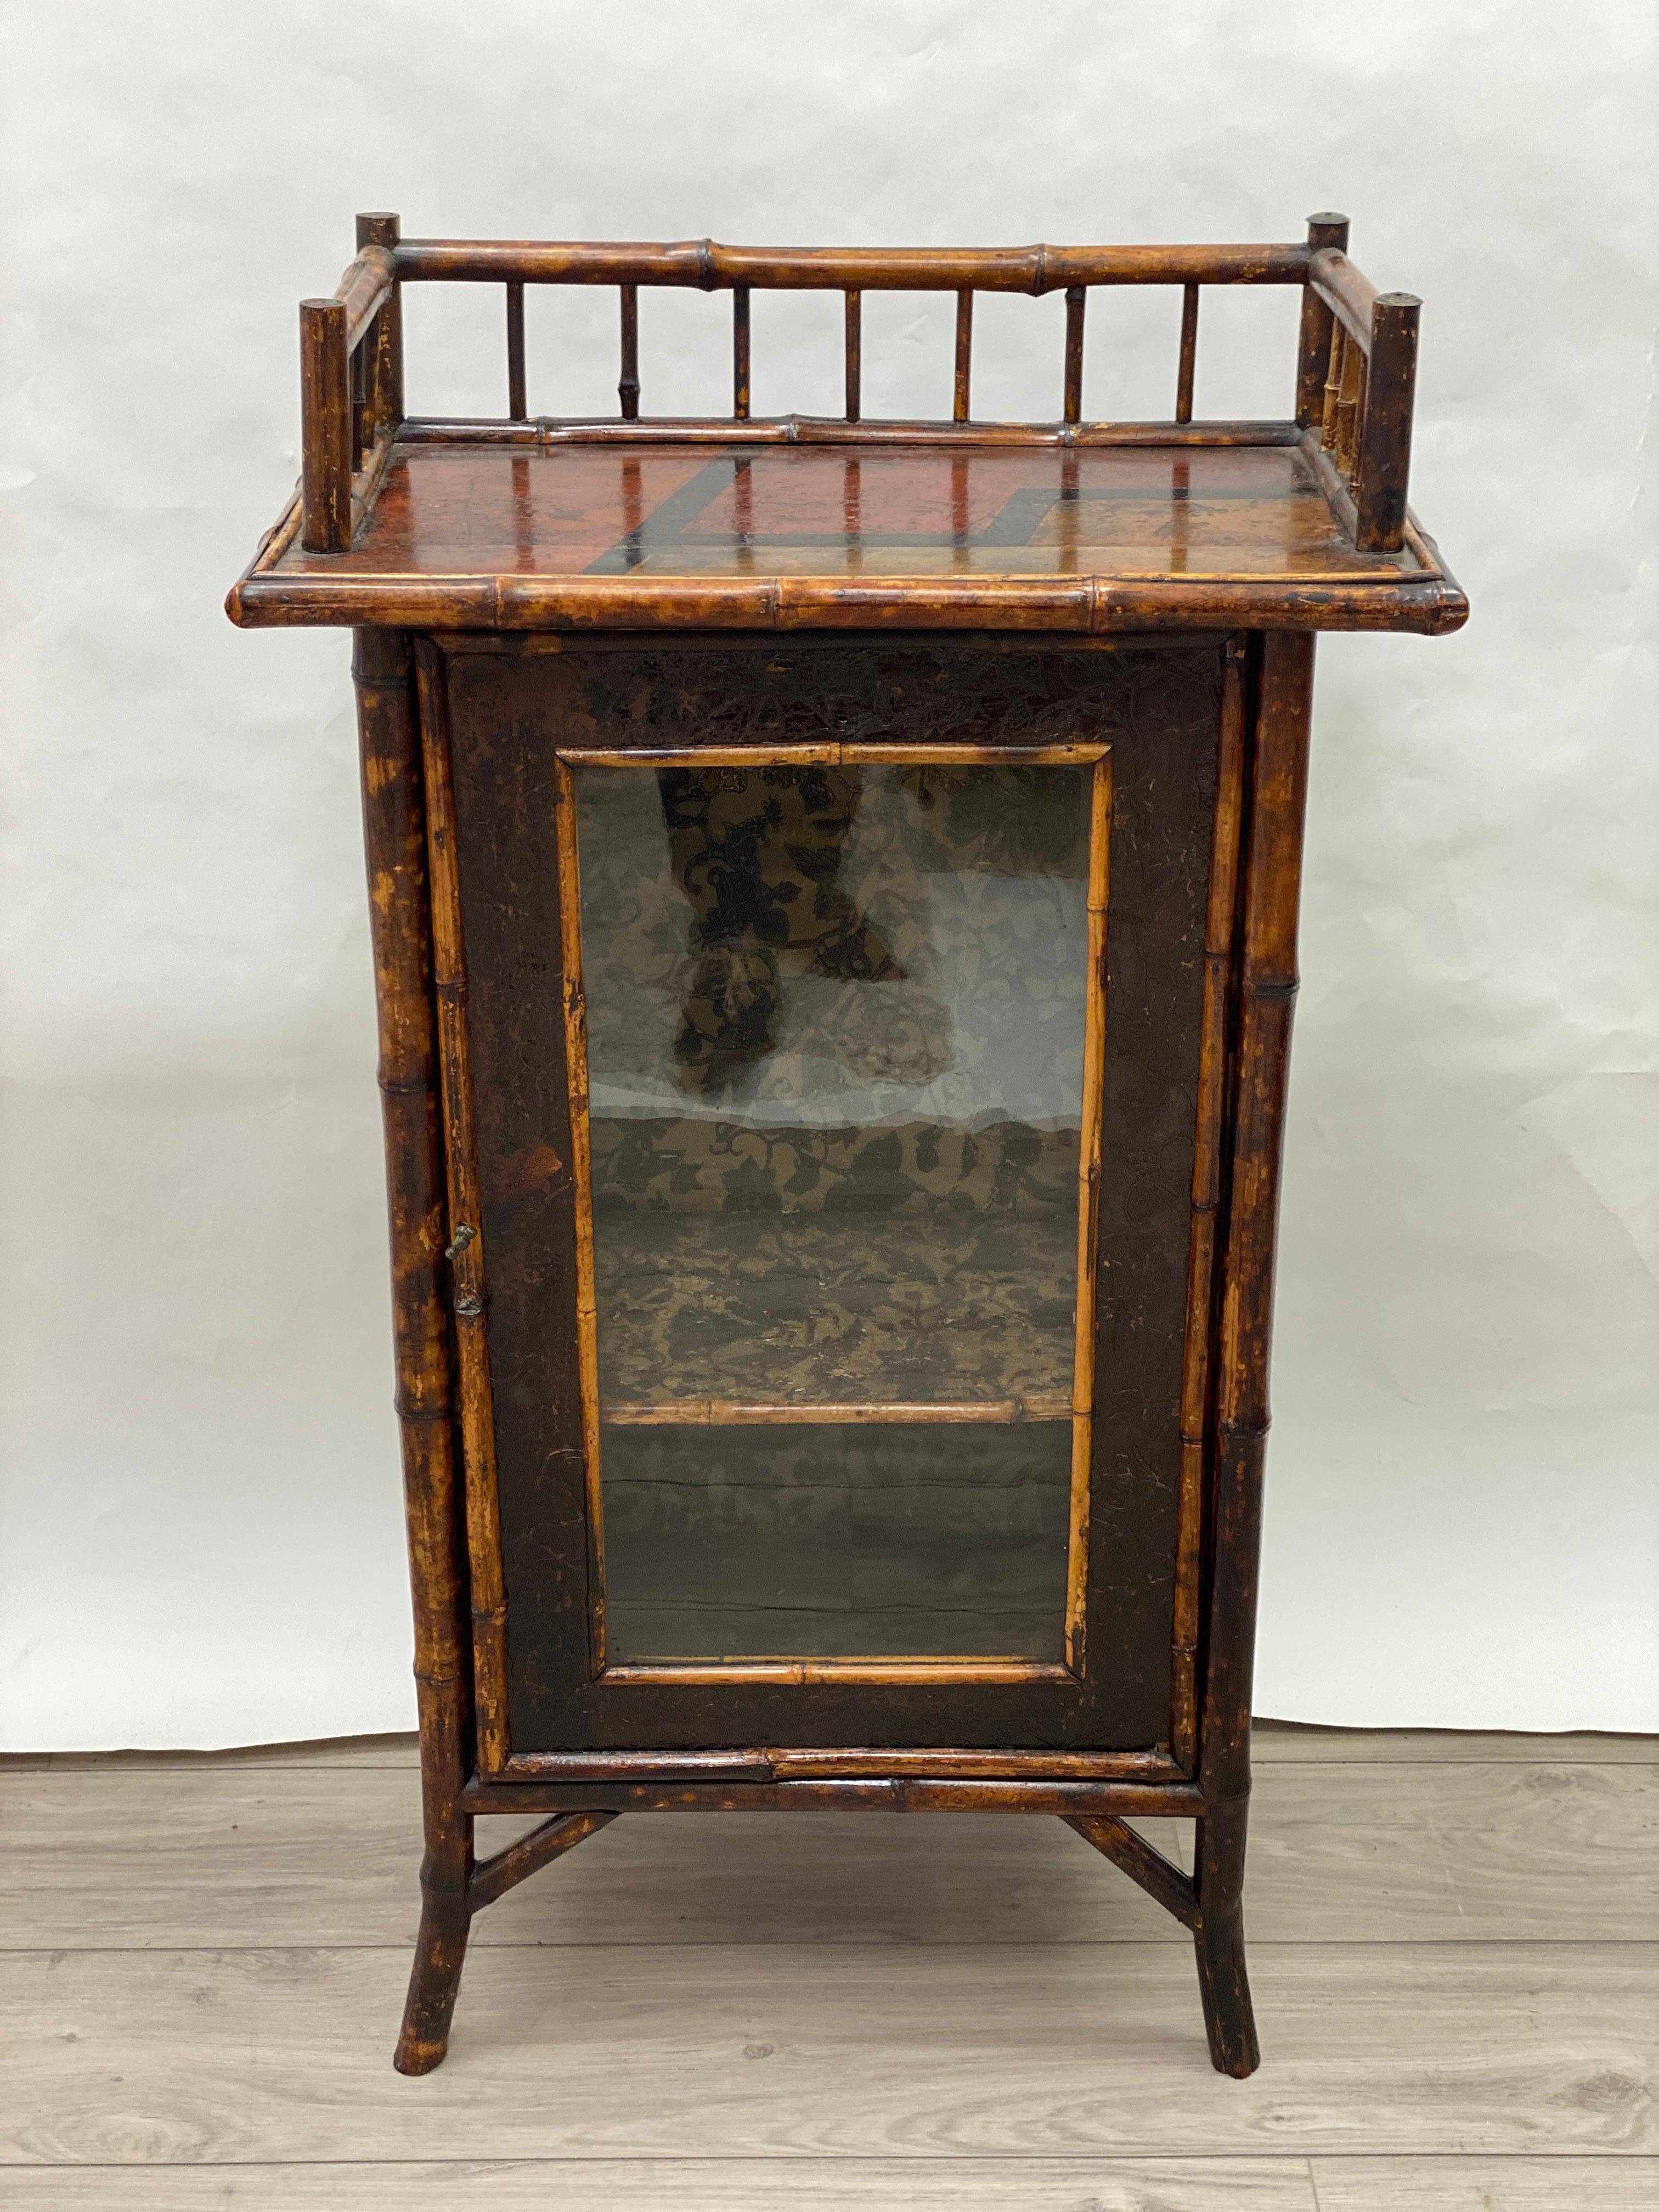 Quaint 19th century English Aesthetic movement bamboo stand. The sides and door are lined with tooled leather. The top surface is lacquered and hand painted, The interior has one fixed shelf and is upholstered. The glass door is orignal to the